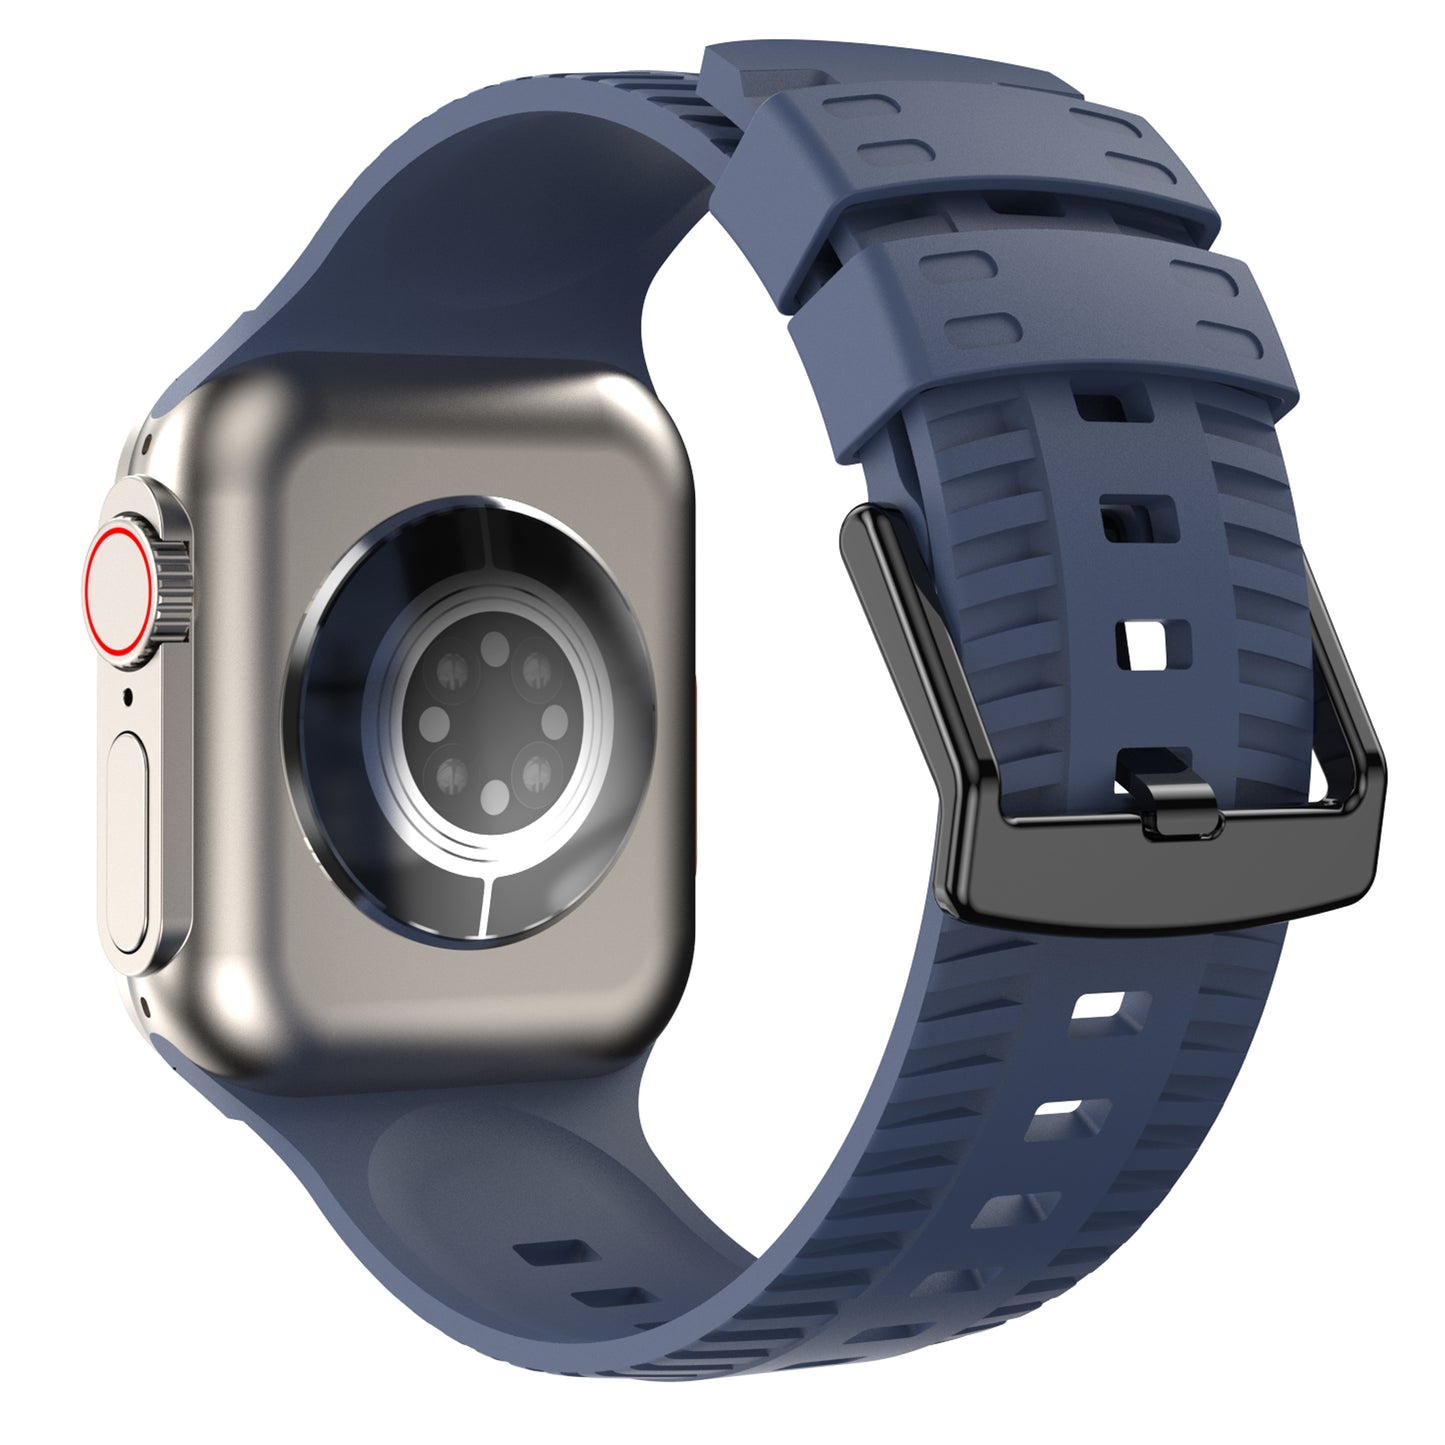 Silicon Strap Waterproof for Apple Watch